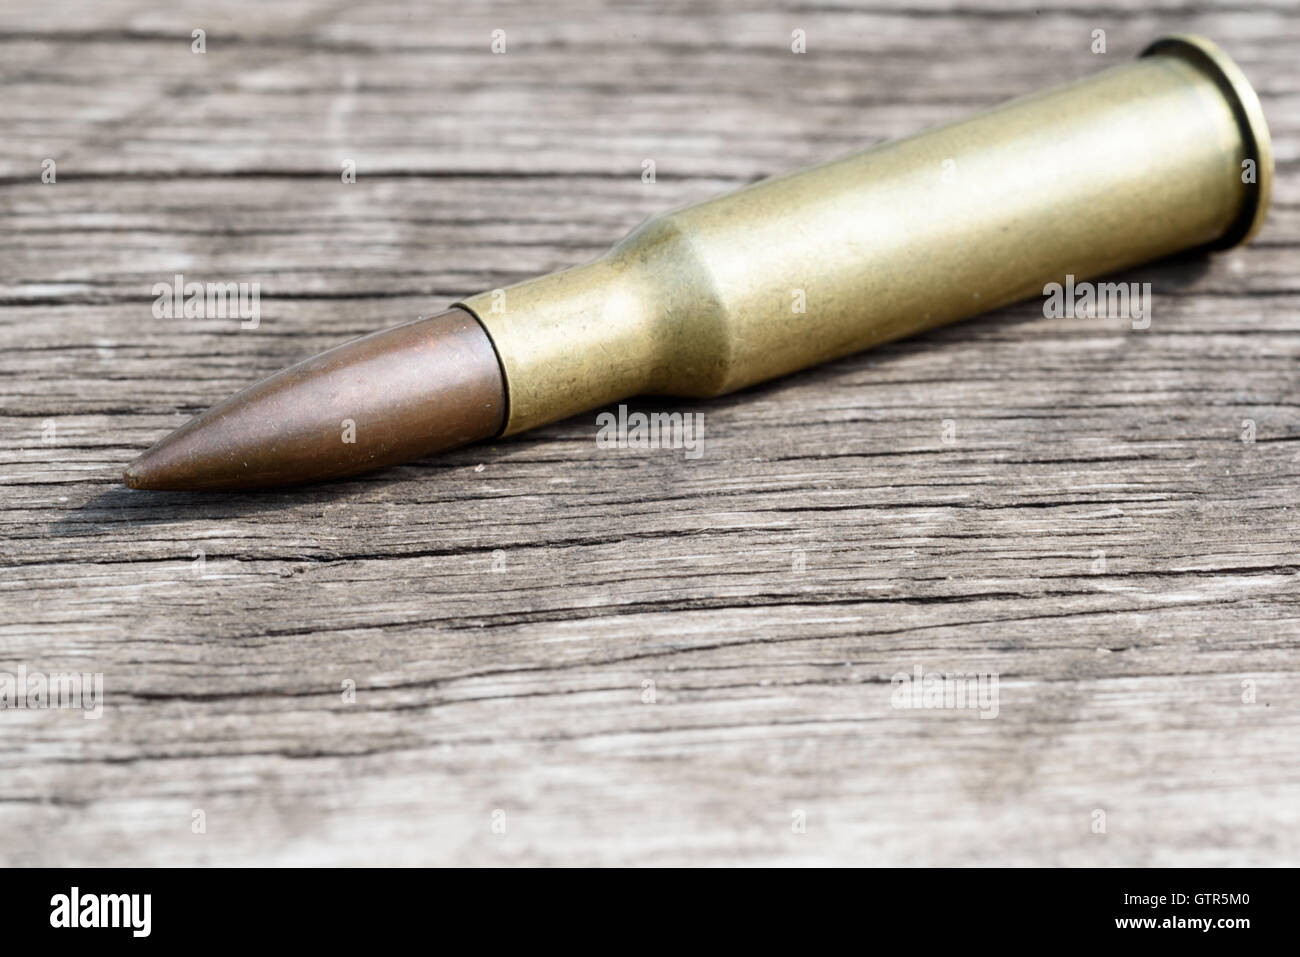 Single unfired 7.62mm bullet and brass casing lying diagonal on an